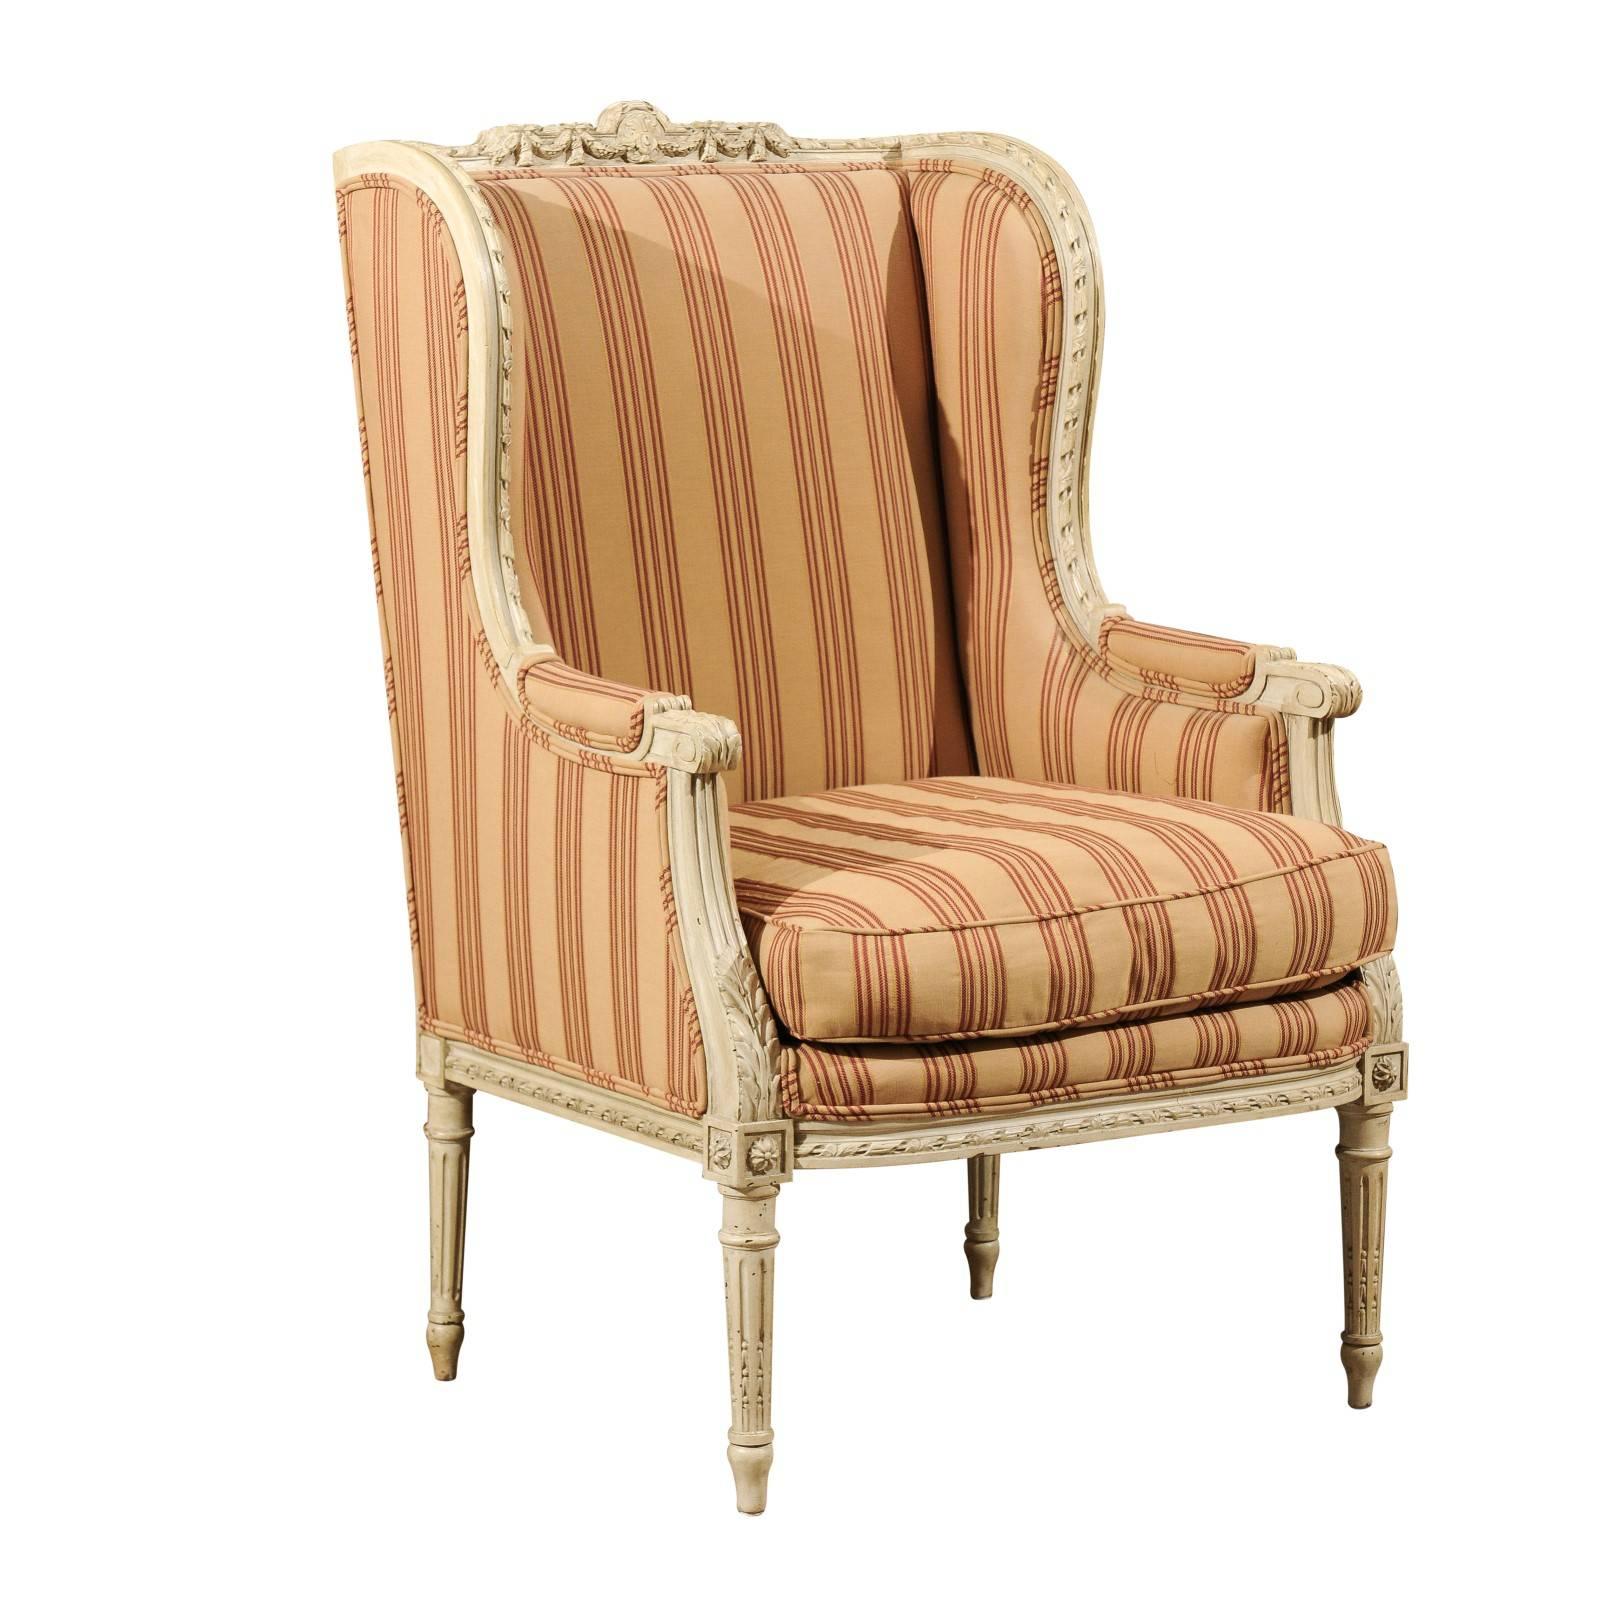 French Louis XVI Style Painted Wood Upholstered Wingback Chair, circa 1880